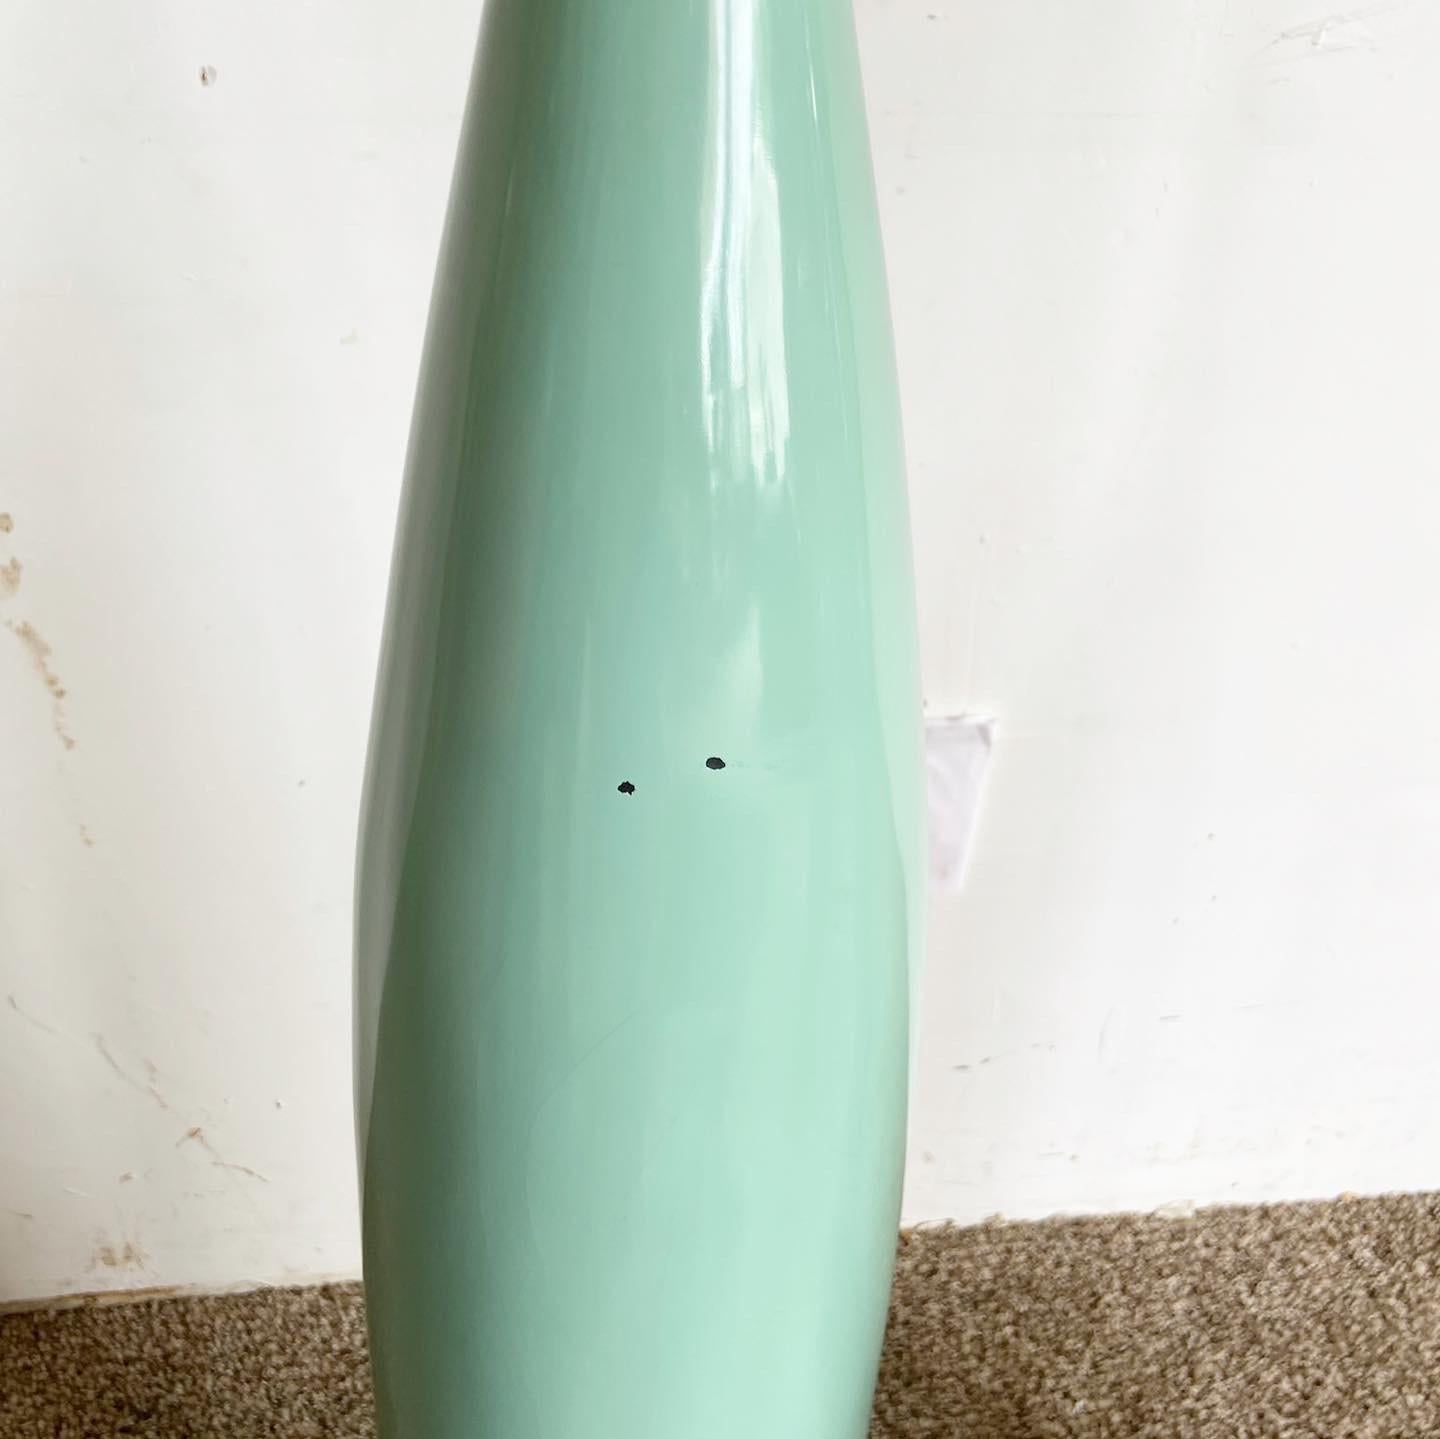 Postmodern Vases by Oggetti in Pink, Purple, and Teal - 6 Pieces For Sale 1